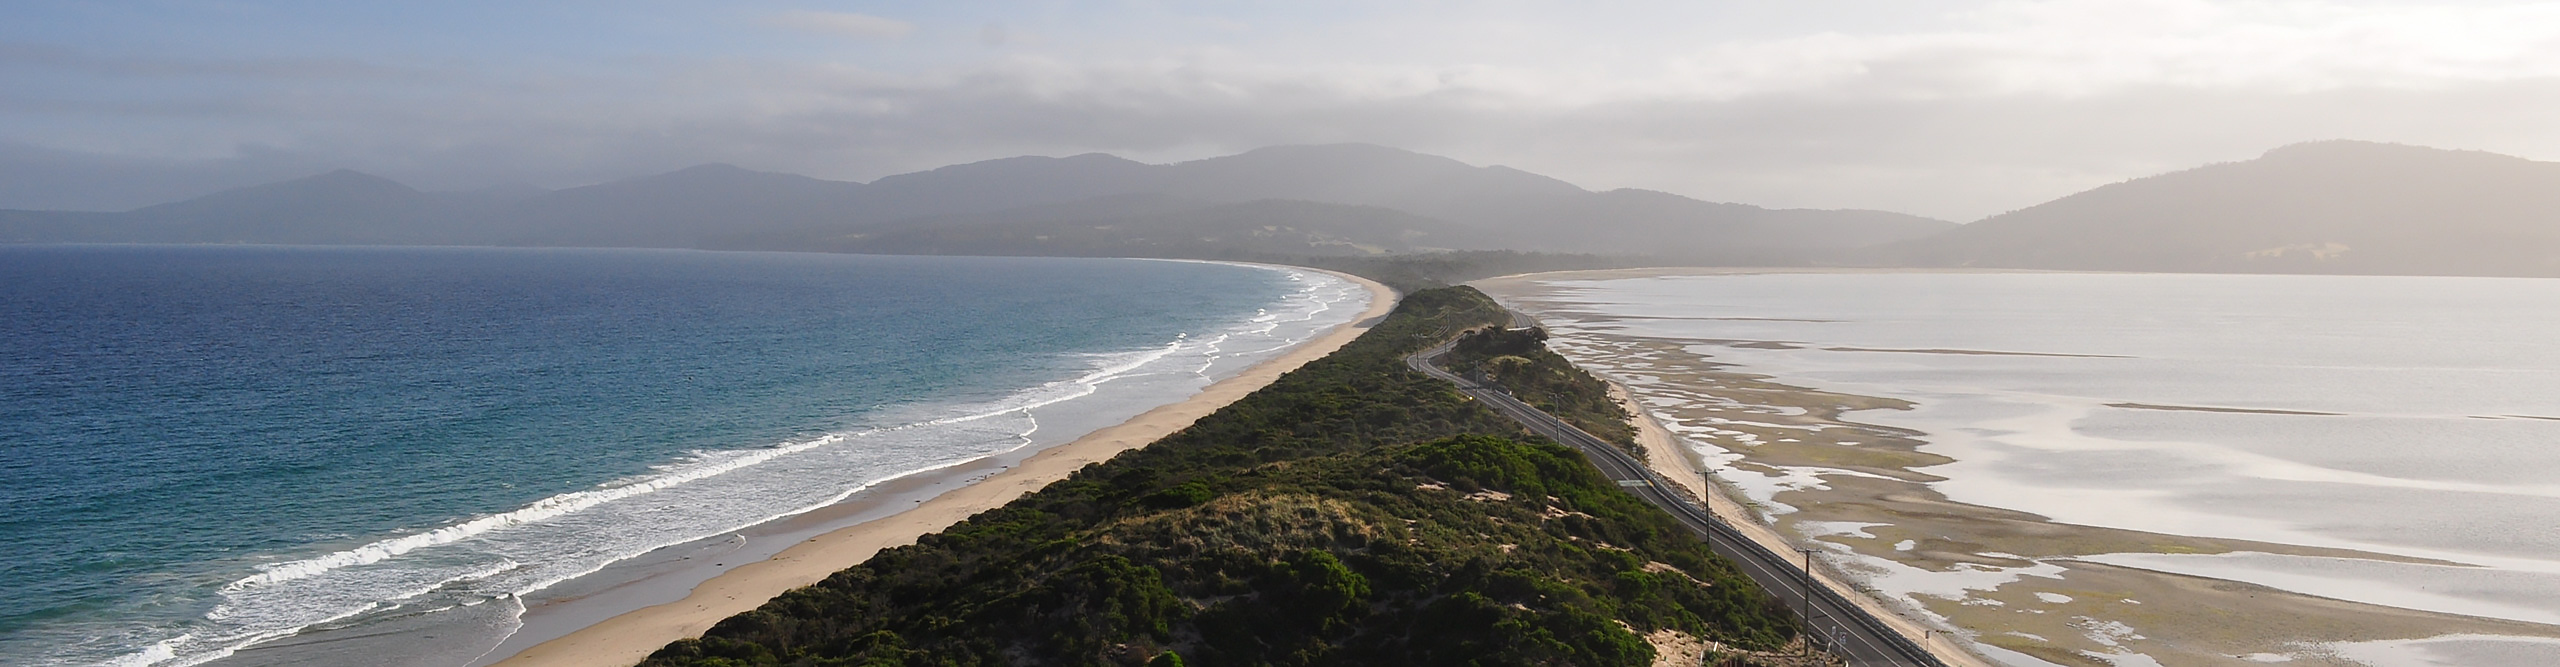 The narrow isthmus called The Neck, with open ocean one side, in Bruny Island, Tasmania.